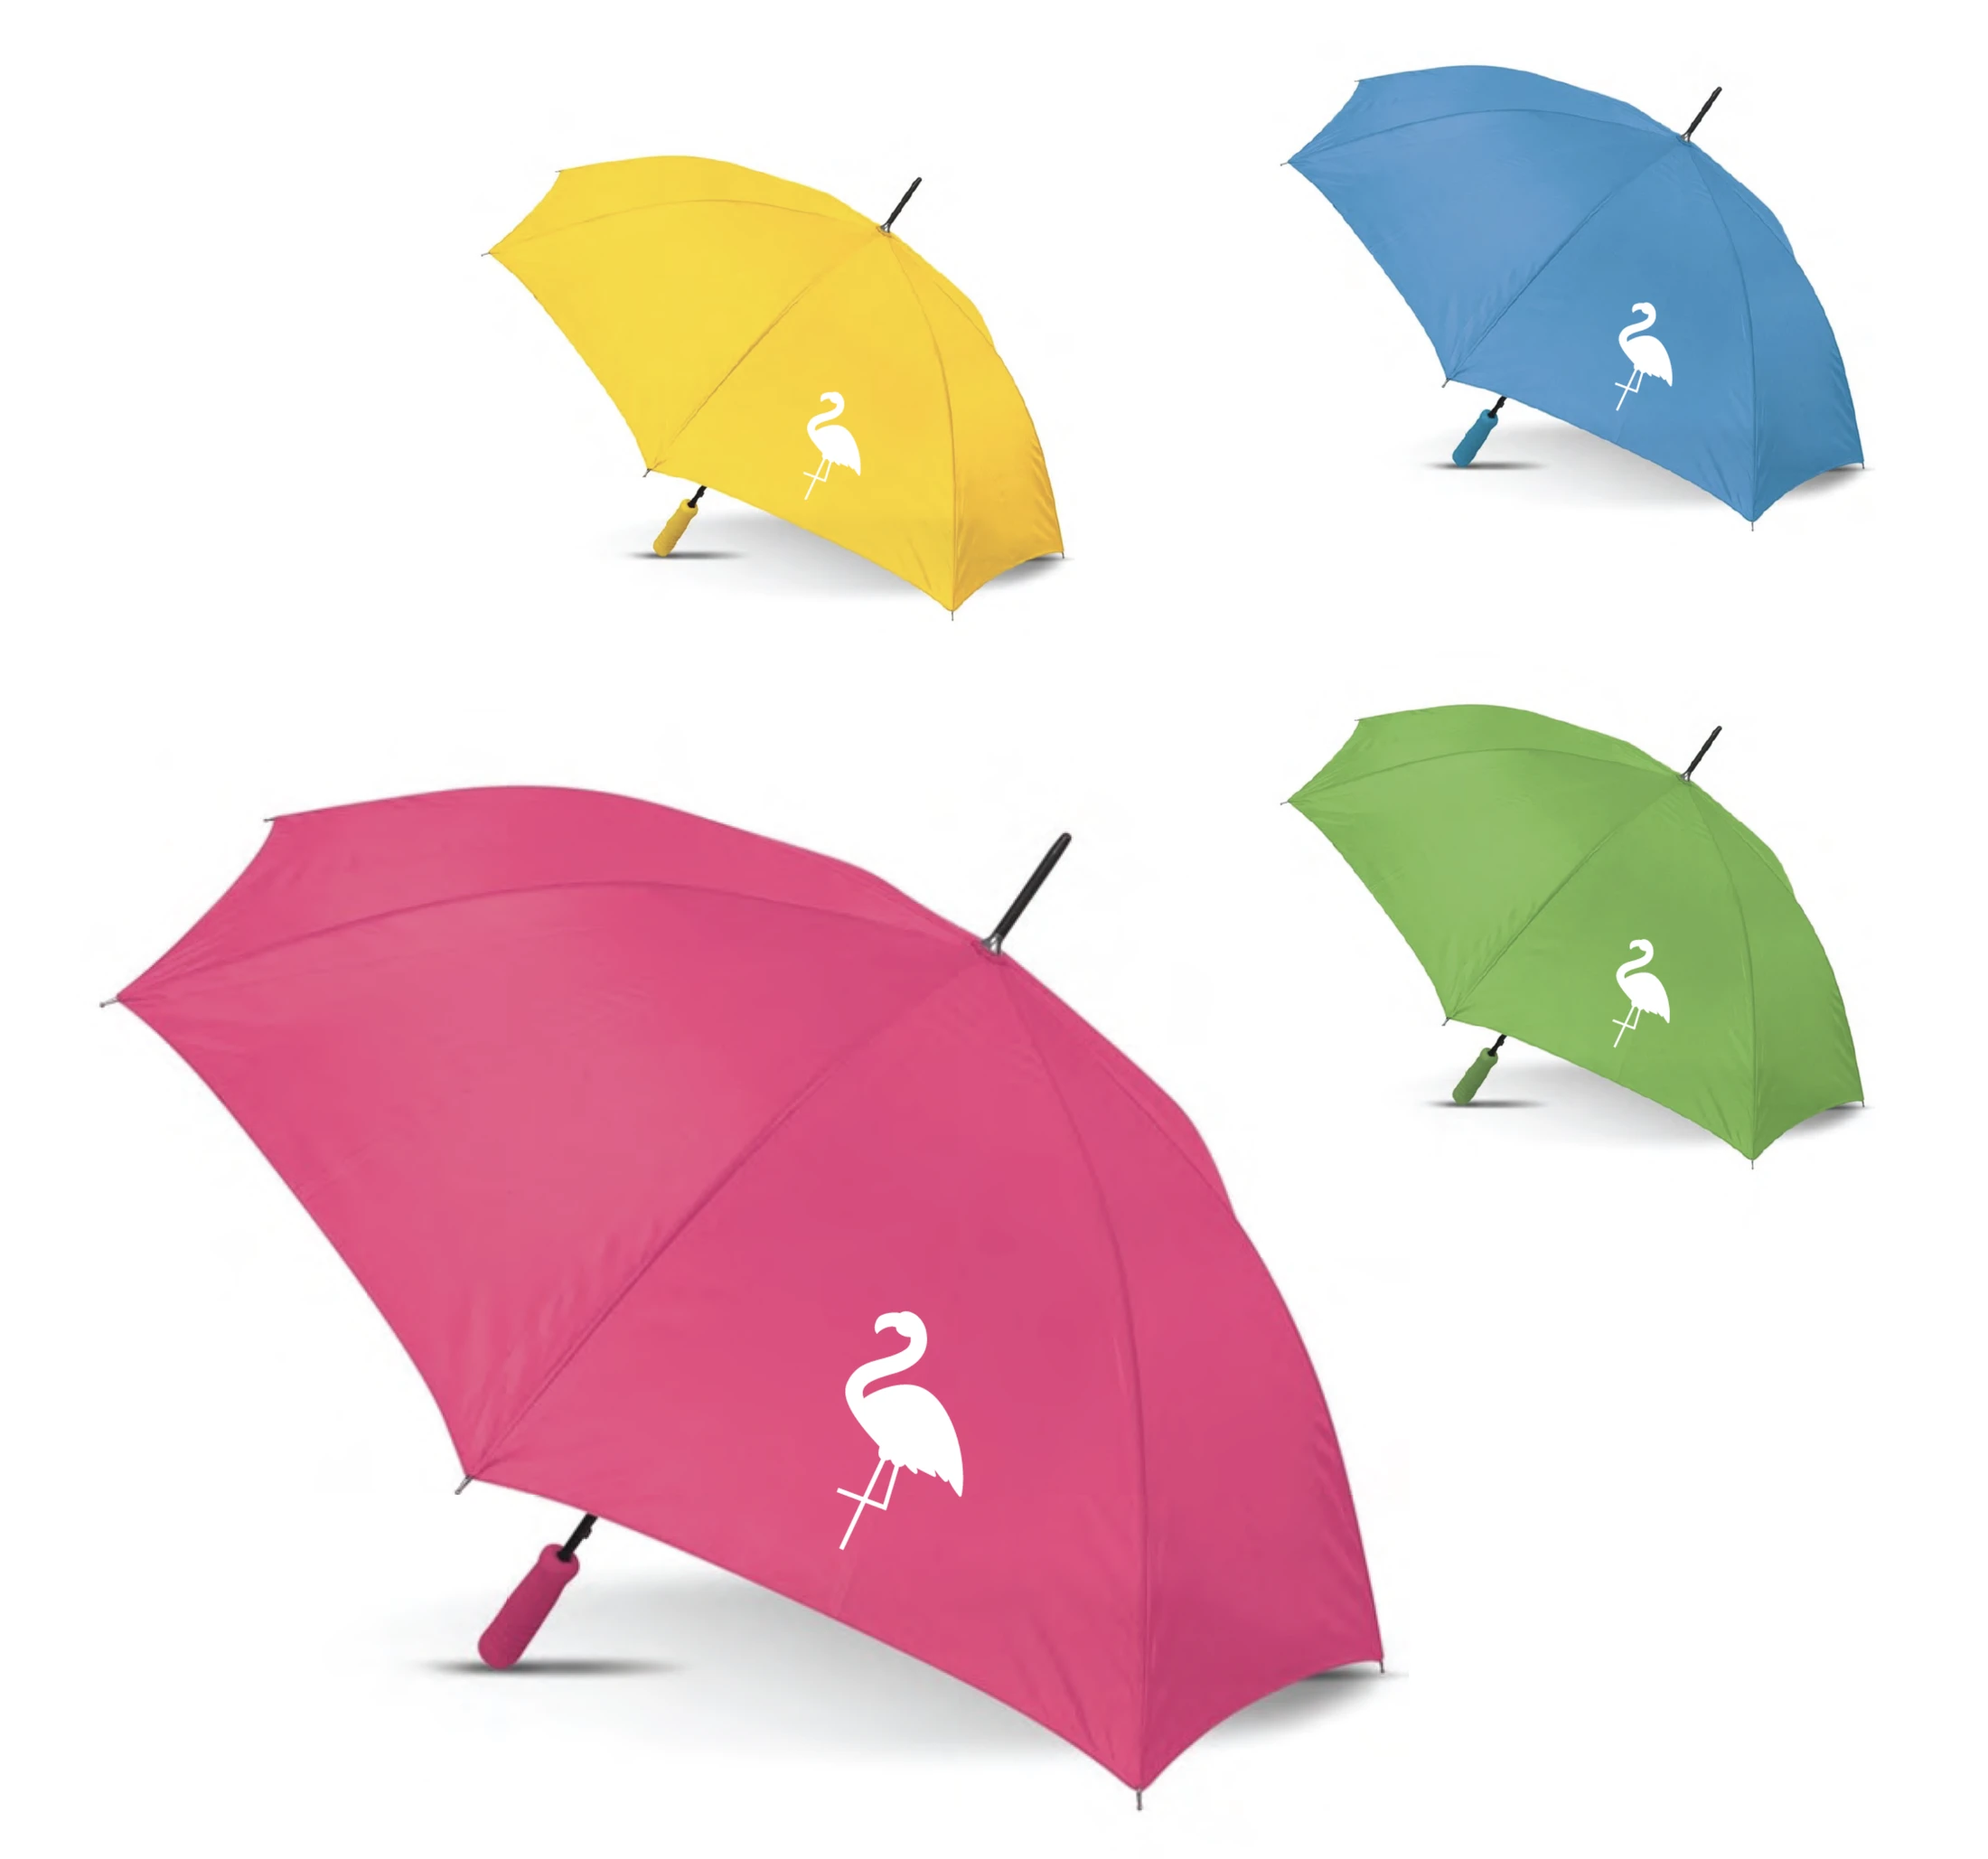 Four colorful umbrellas with flamingos on them.